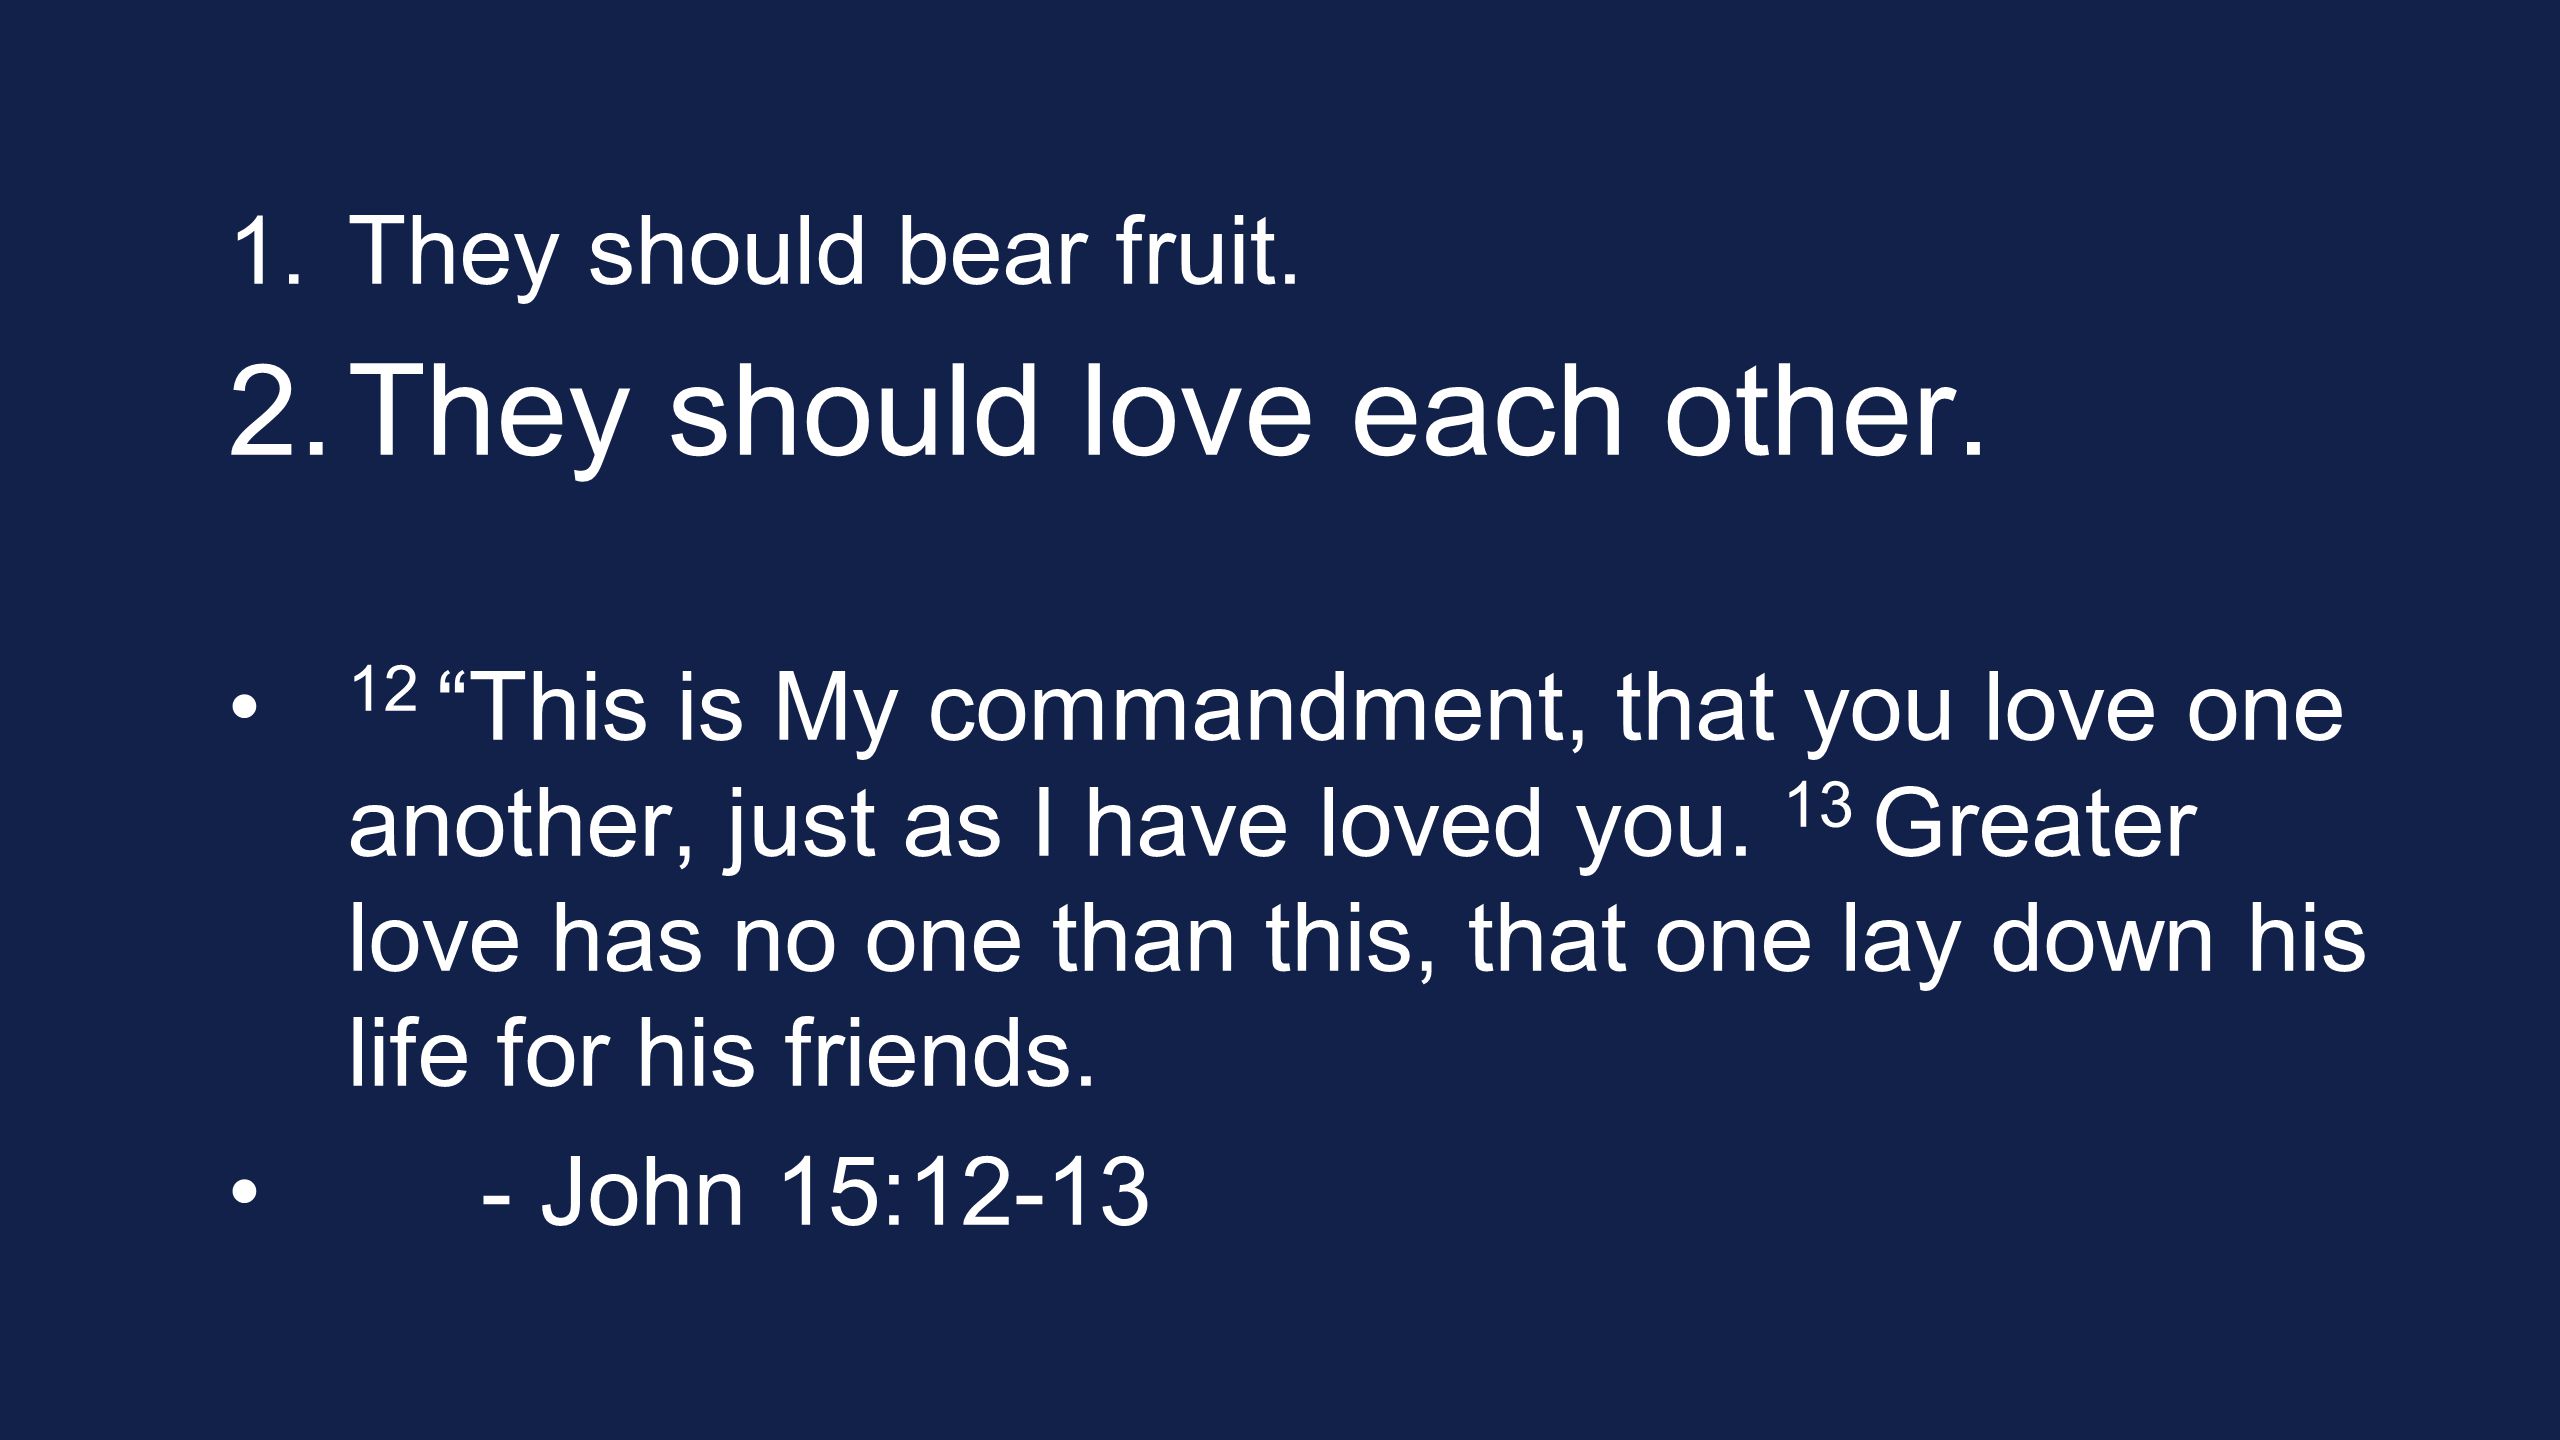 1. They should bear fruit. 2. They should love each other.